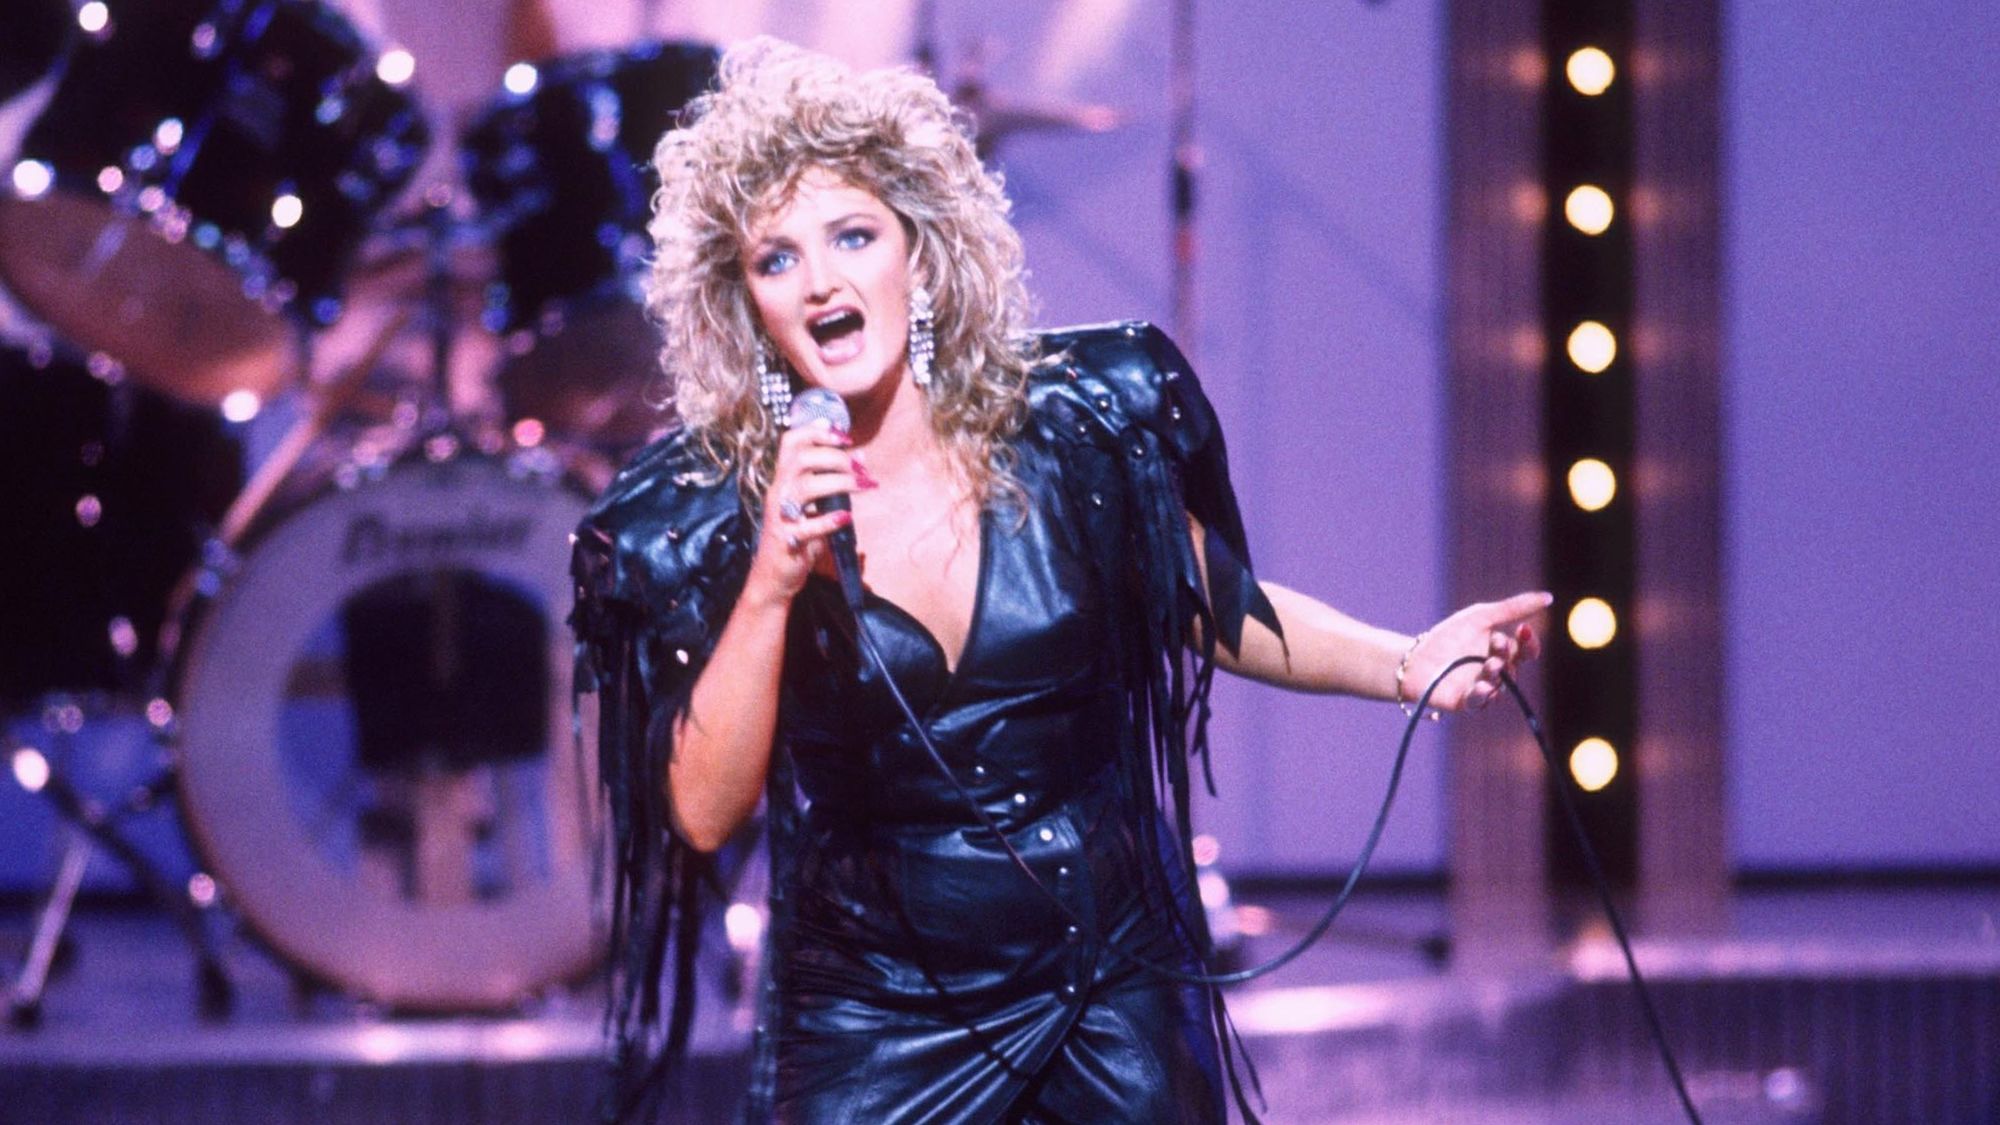 ‘Total Eclipse of the Heart’ searches surge on Spotify